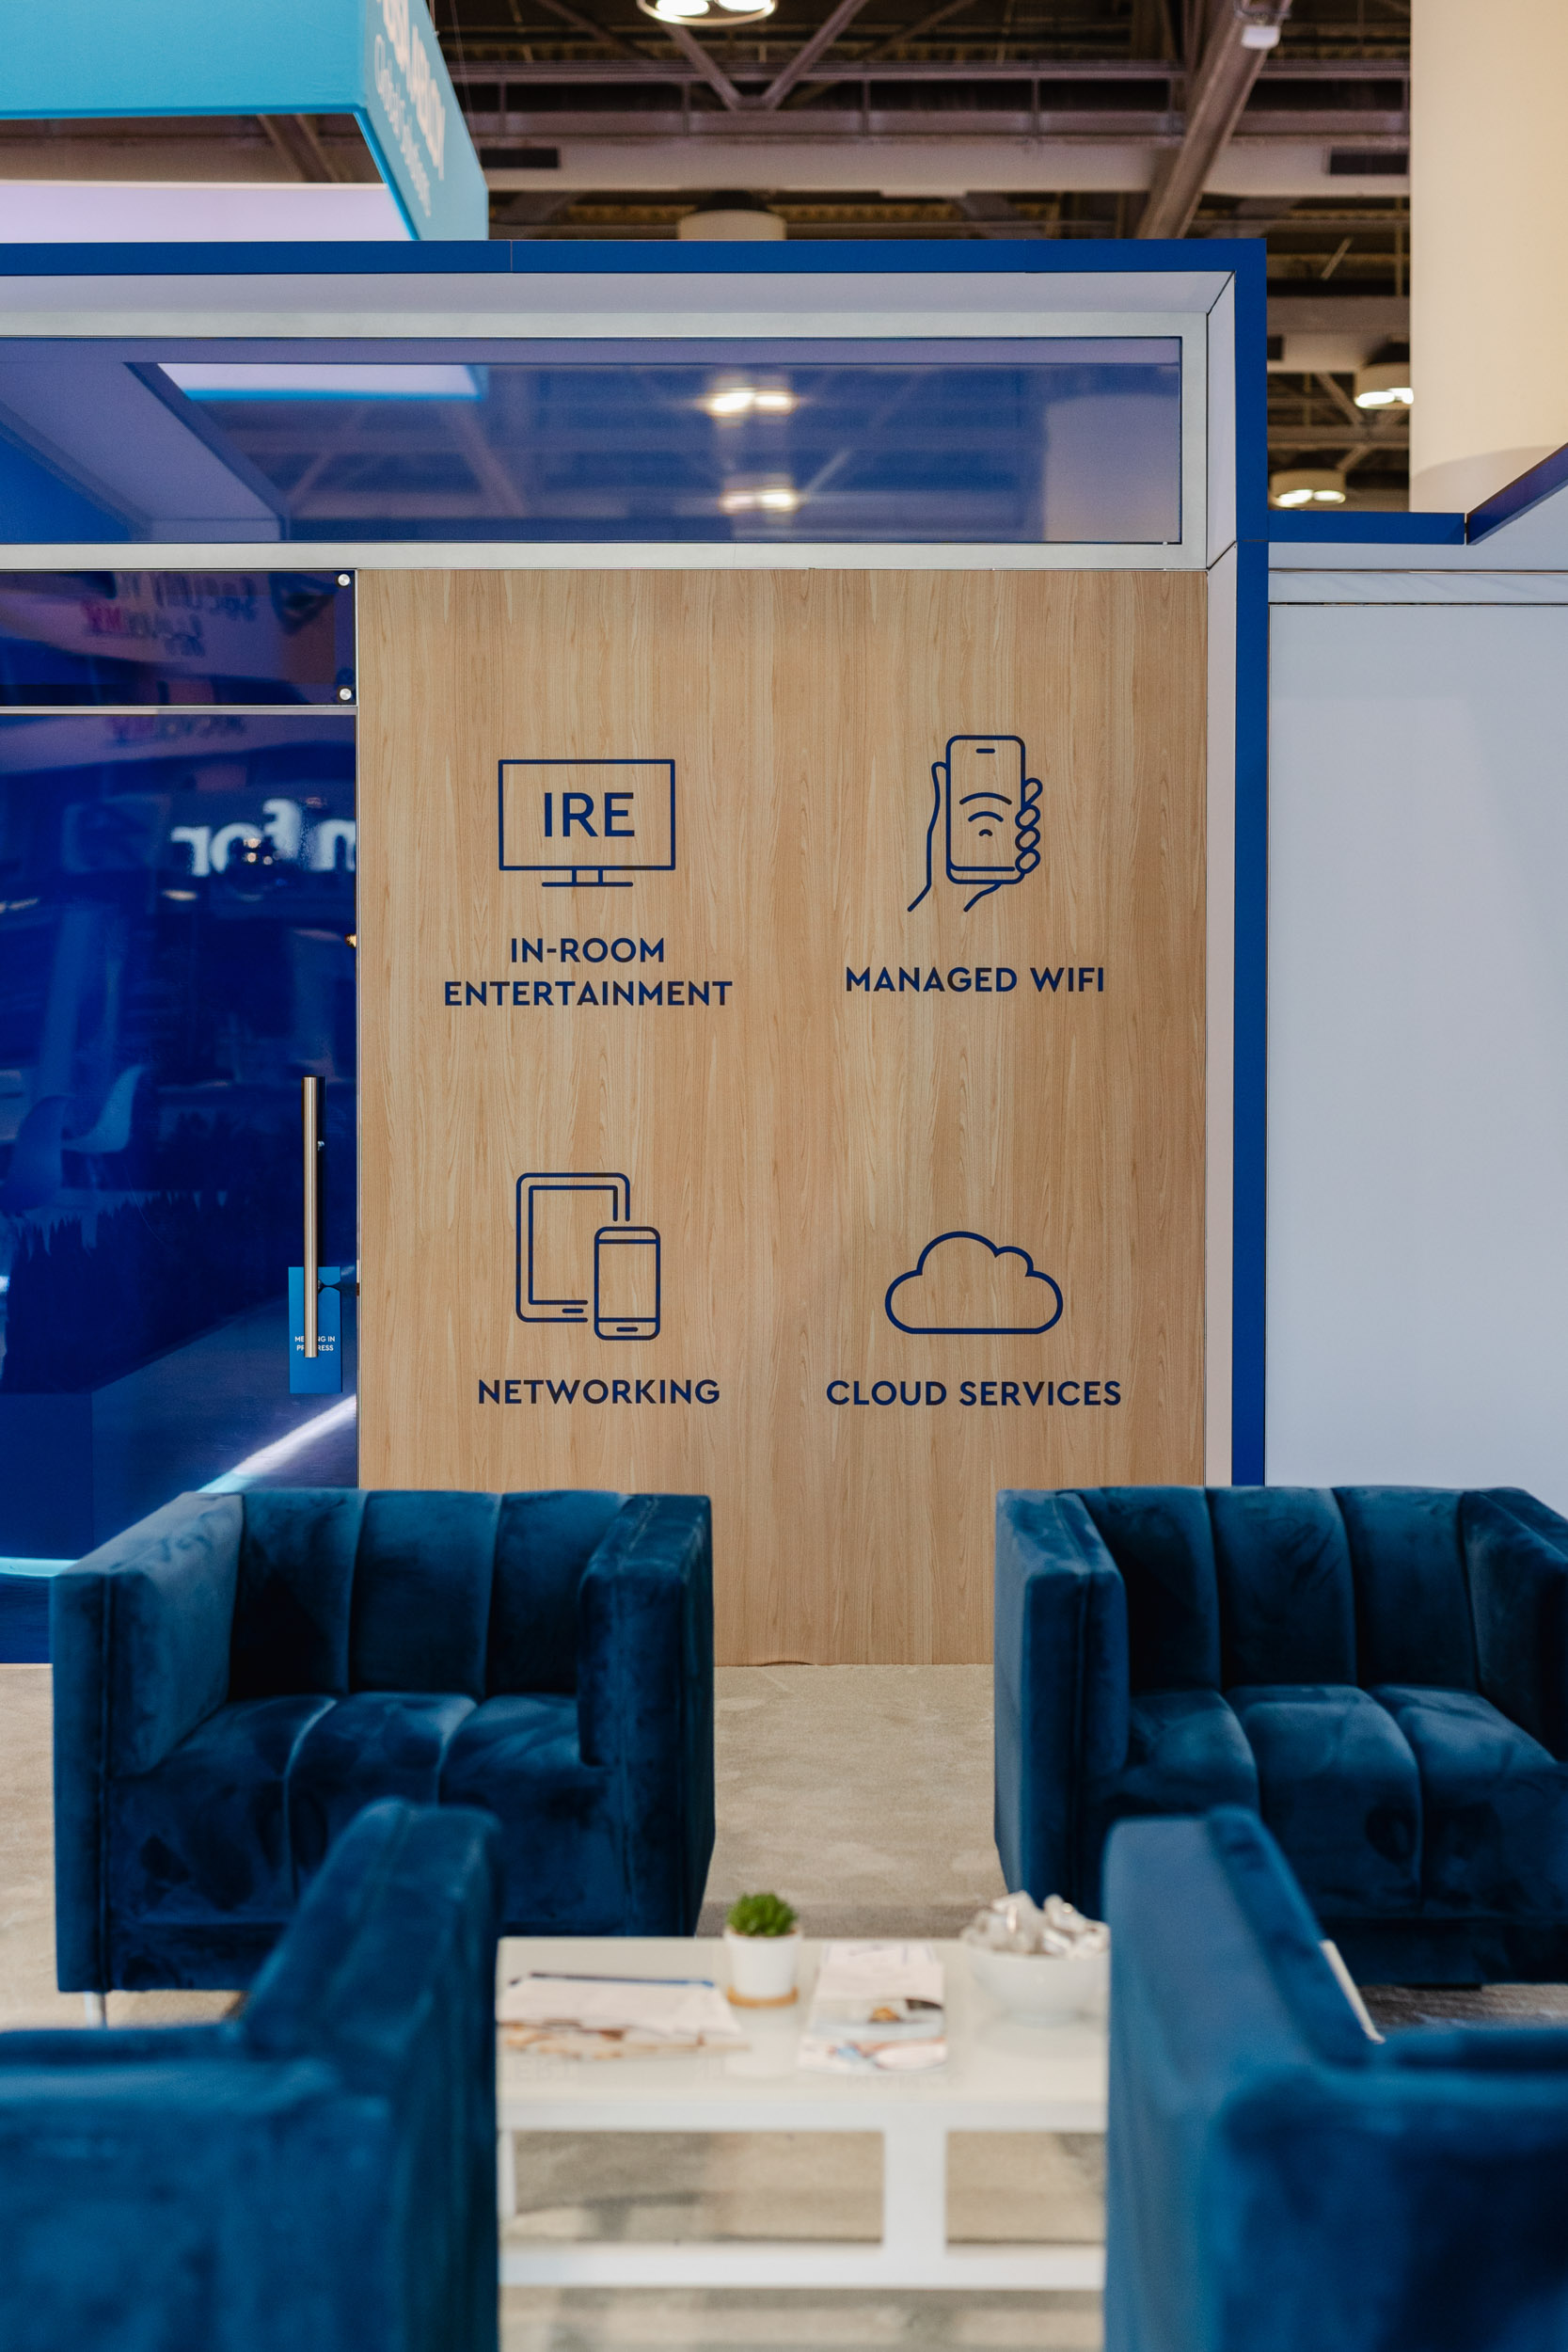 A Toronto trade show booth featuring blue couches against a blue wall.